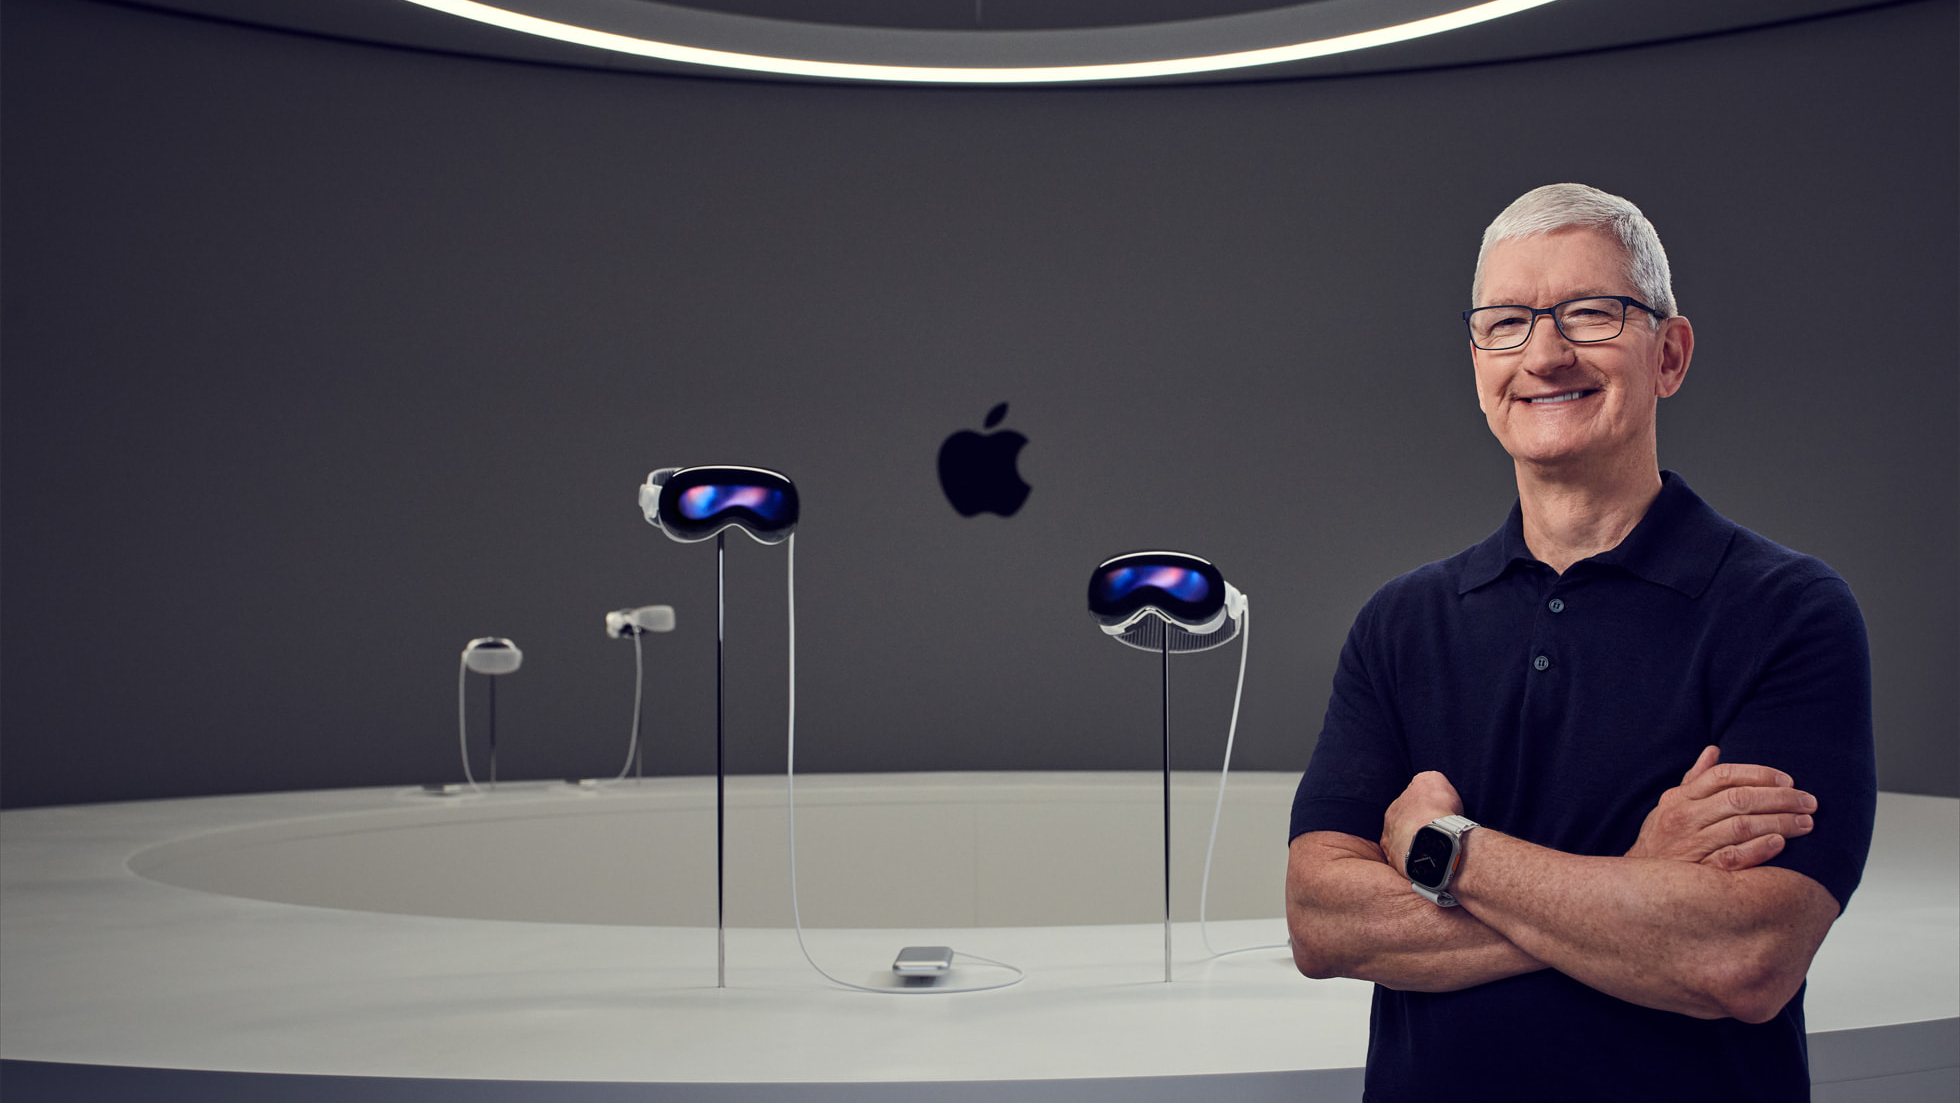 Tim Cook experienced an Apple Vision Pro prototype…